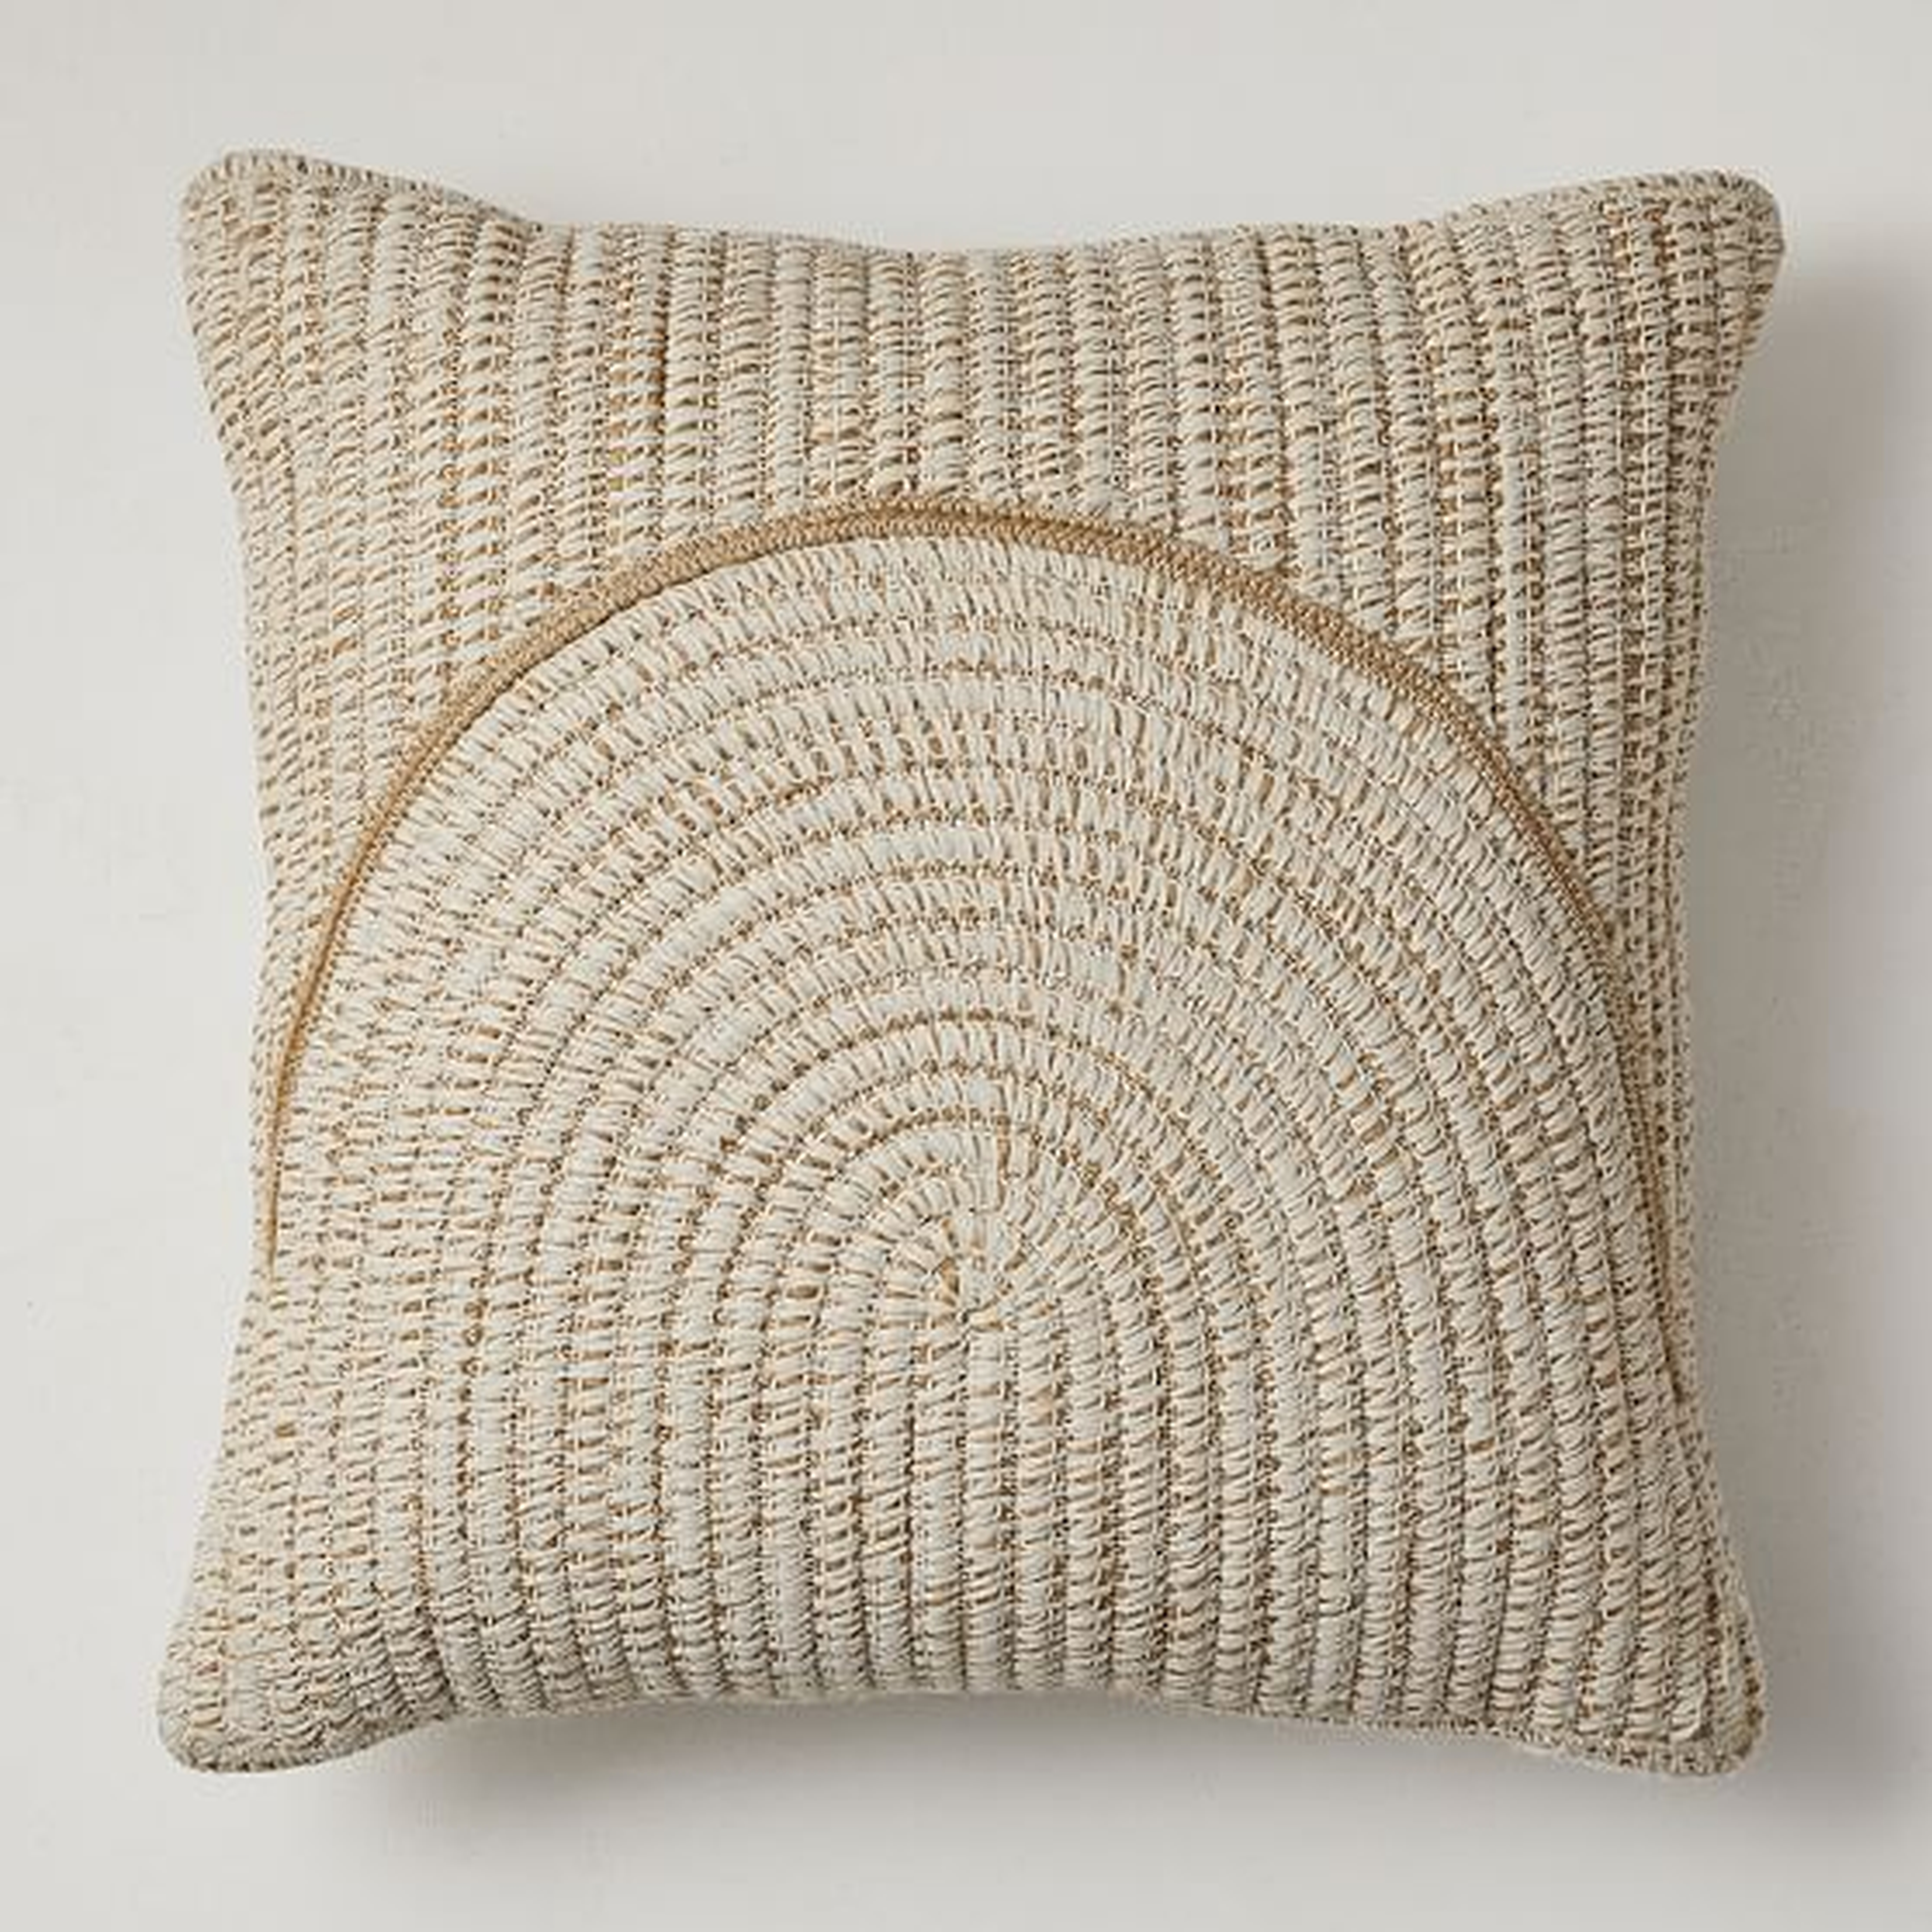 Outdoor Woven Arches Pillow, 20"x20", Natural, Individual - West Elm